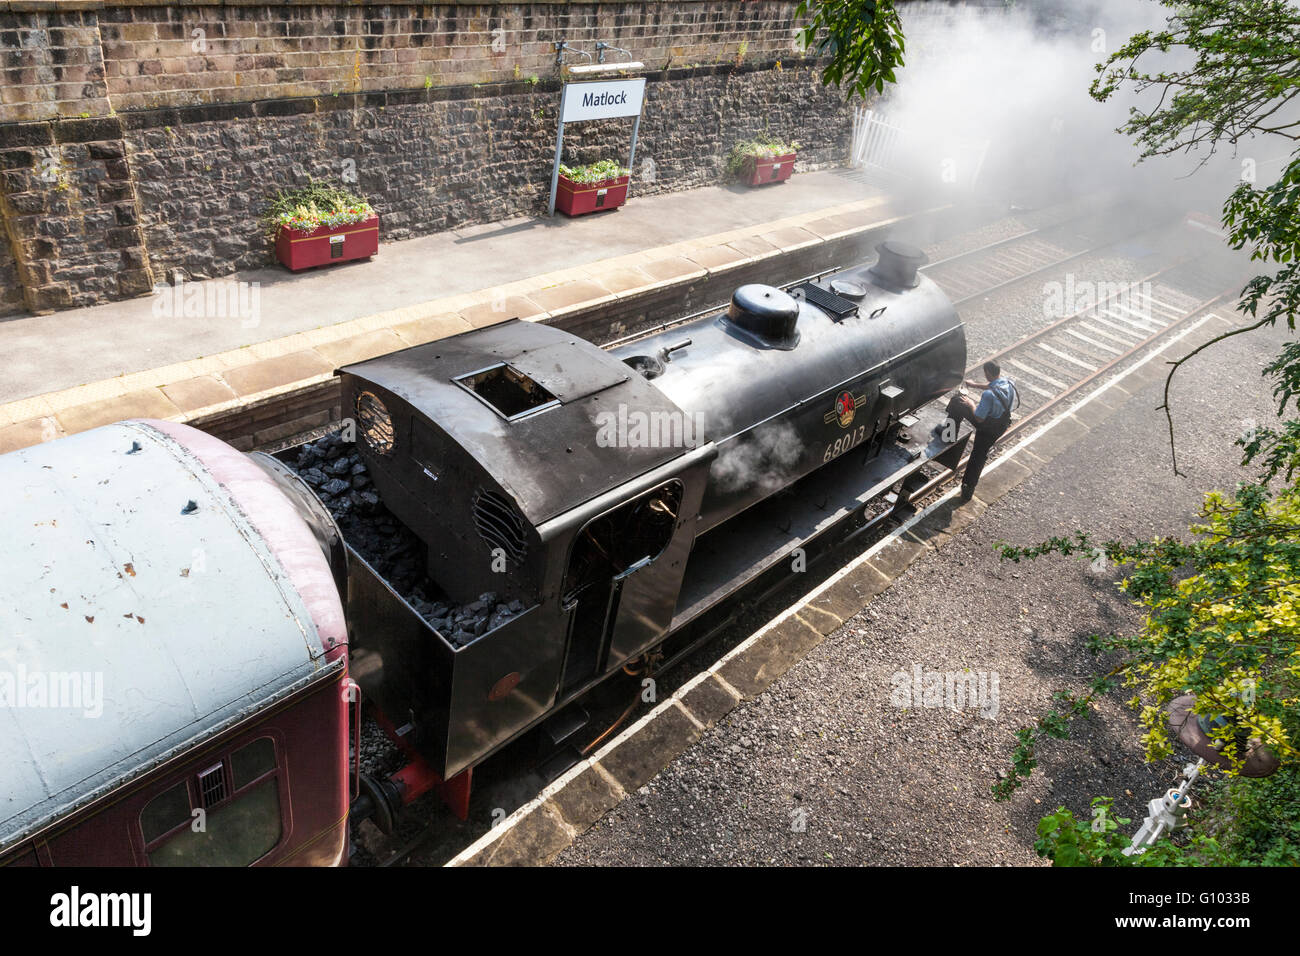 Heritage railway in the UK. Peak Rail steam engine no. 68013 from above at Matlock Station, Derbyshire, England, UK Stock Photo